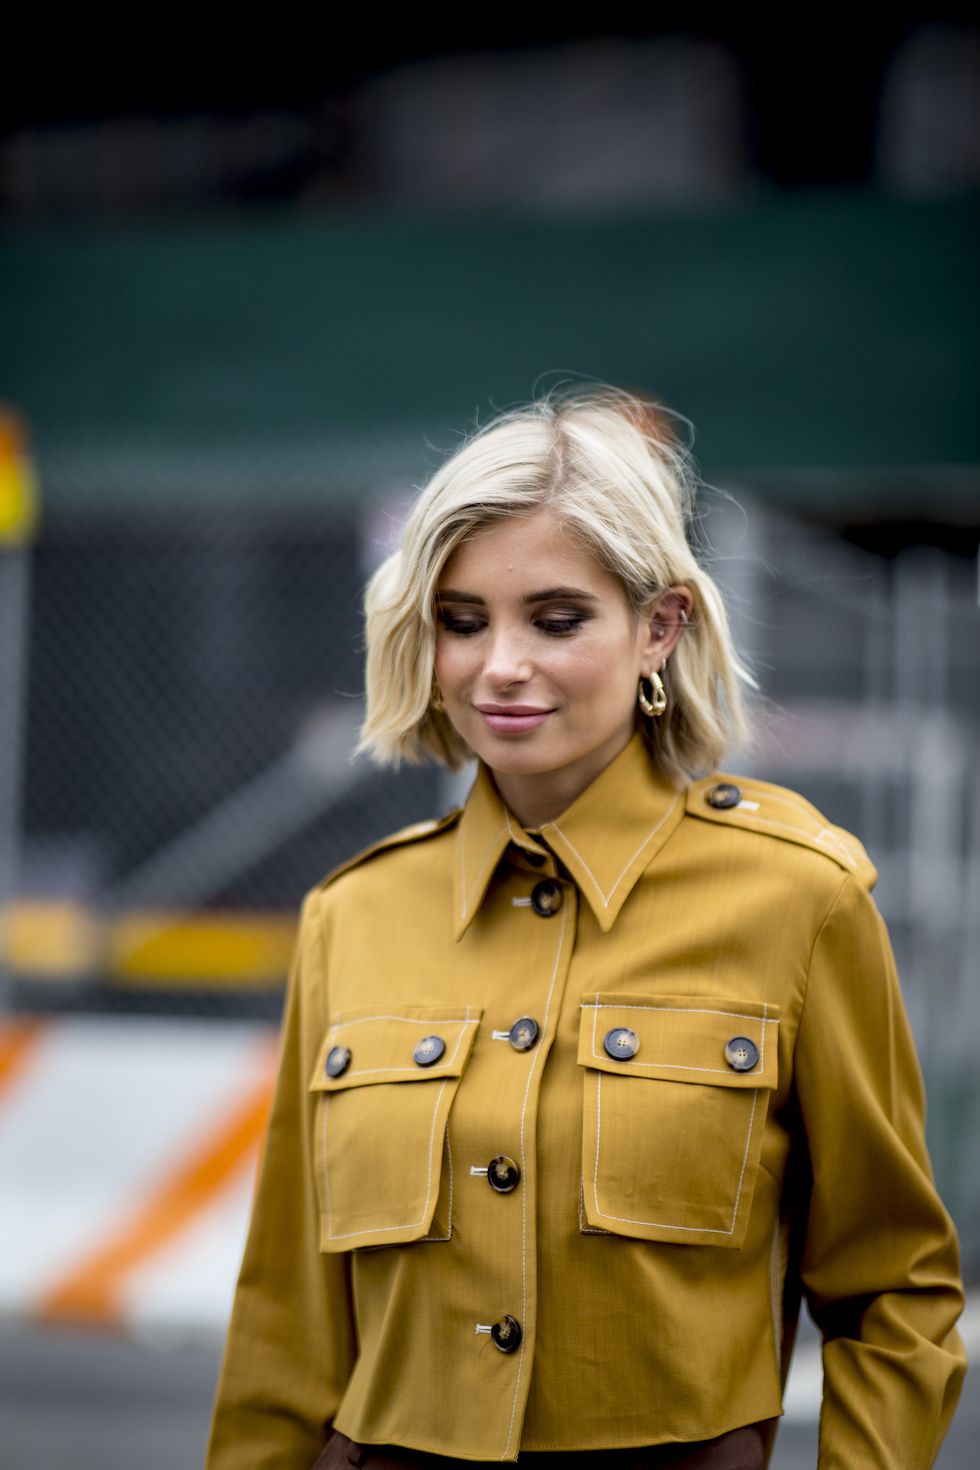 Hair, Blond, Yellow, Street fashion, Beauty, Fashion, Hairstyle, Outerwear, Coat, Trench coat, 